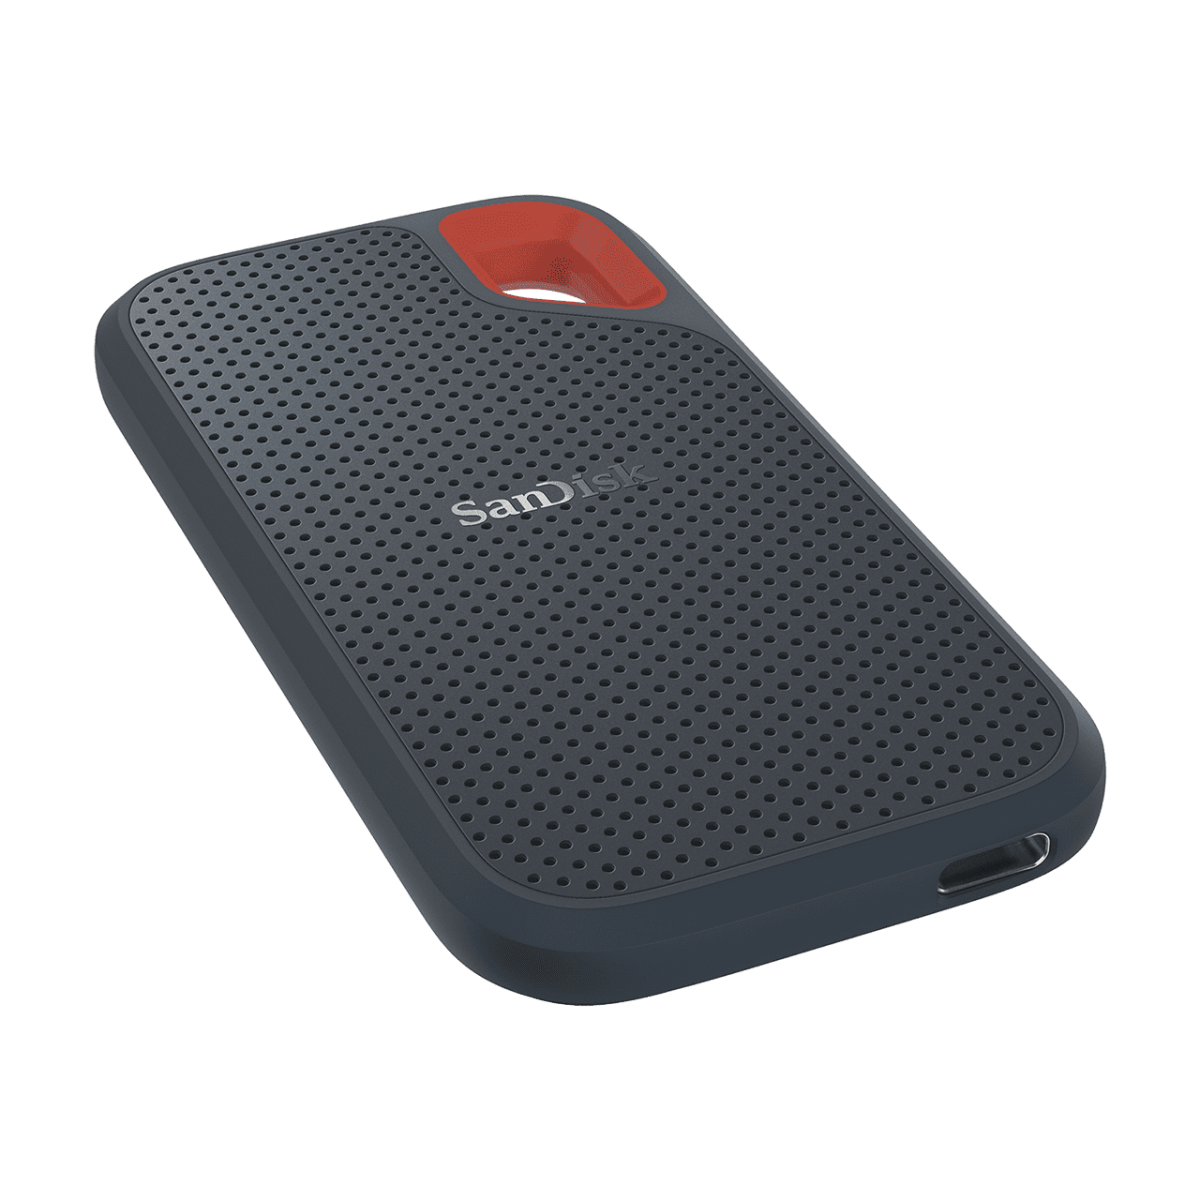 Extreme Usb 3 1 Ssd Flat.png.thumb .1280.1280 Sandisk &Lt;H1&Gt;Speed Up The Flow. Move Files Faster.&Lt;/H1&Gt; &Lt;Div Class=&Quot;Inheritpara Mb-4&Quot;&Gt; The Rugged Sandisk® Extreme Portable Ssd Delivers High-Speed Transfers With Up To 550Mb/S Read Speeds. This Makes It Perfect For Saving And Editing Hi-Res Photos And Videos. With An Ip55 Rating, It Also Stands Up To Rain, Splashes, Spills, And Dust. &Lt;/Div&Gt; &Lt;Strong&Gt;3-Year Sandisk Limited Warranty&Lt;/Strong&Gt; [Embed]Https://Youtu.be/On0B70Waom8[/Embed] Sandisk Extreme Portable Ssd 1 Tb Sandisk Extreme Portable Ssd 1 Tb (Rain, Splashes, Spills, And Dust Resistance)